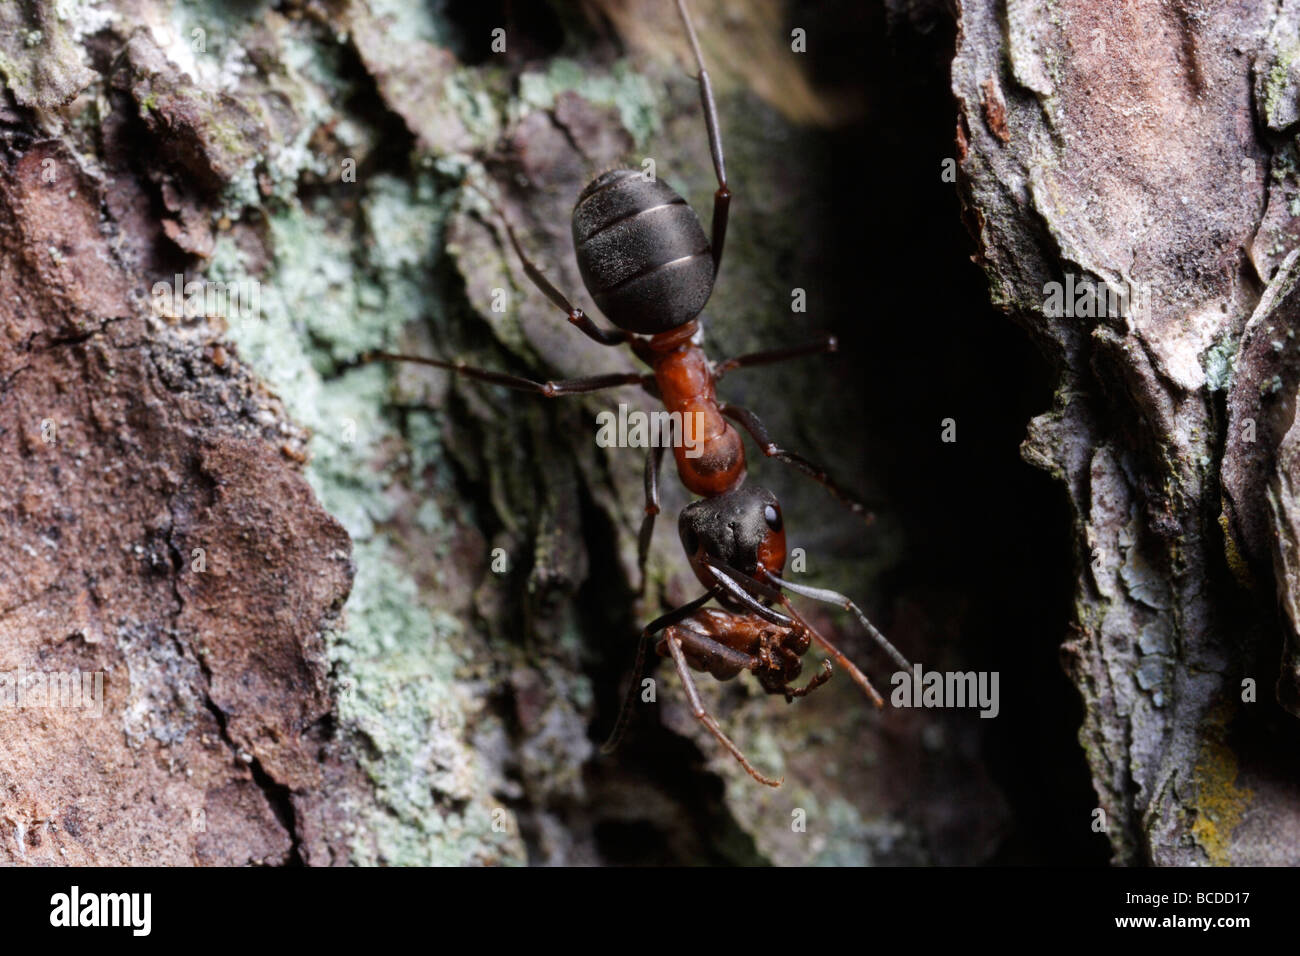 Formica rufa, the southern wood ant or horse ant. One worker carrying prey. Stock Photo